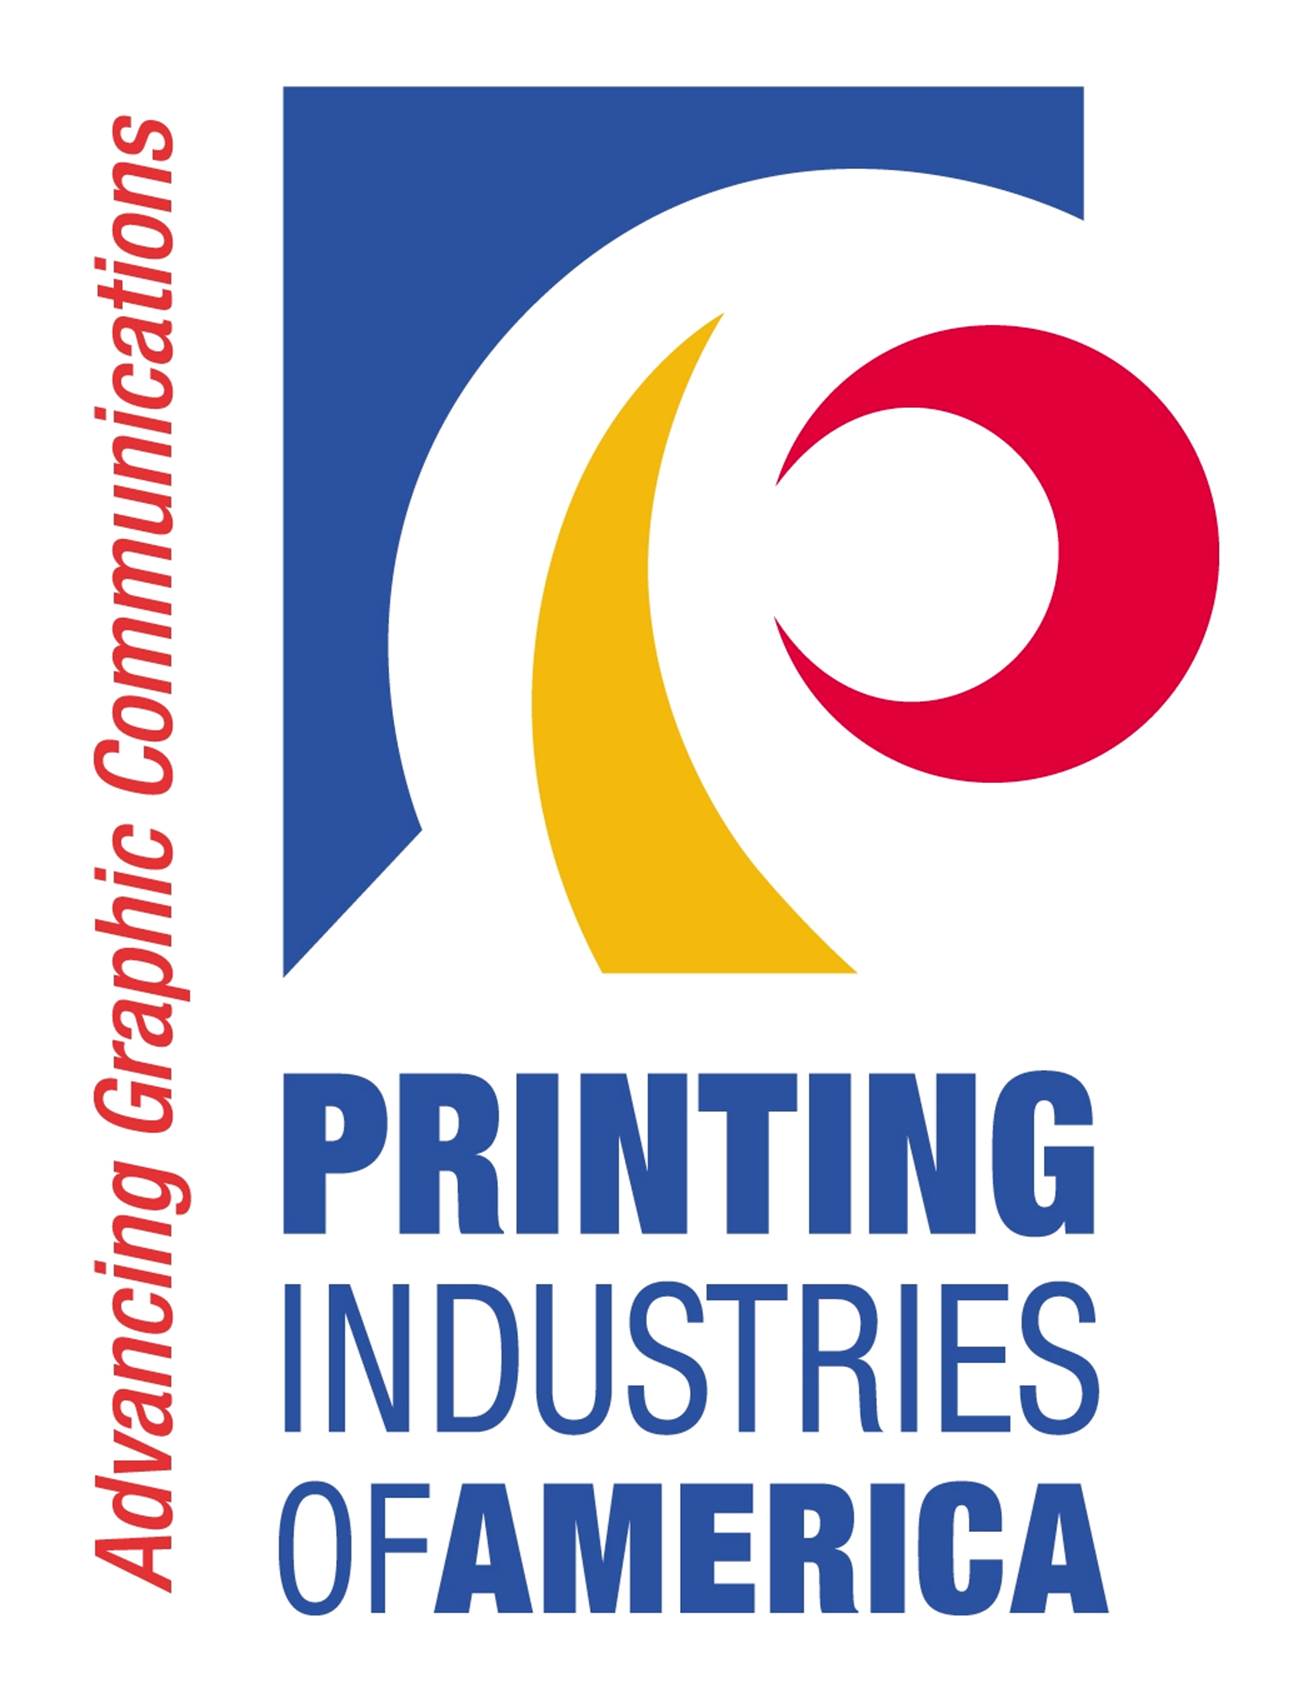 Zairmail is a member of the Printing Industries of America Association